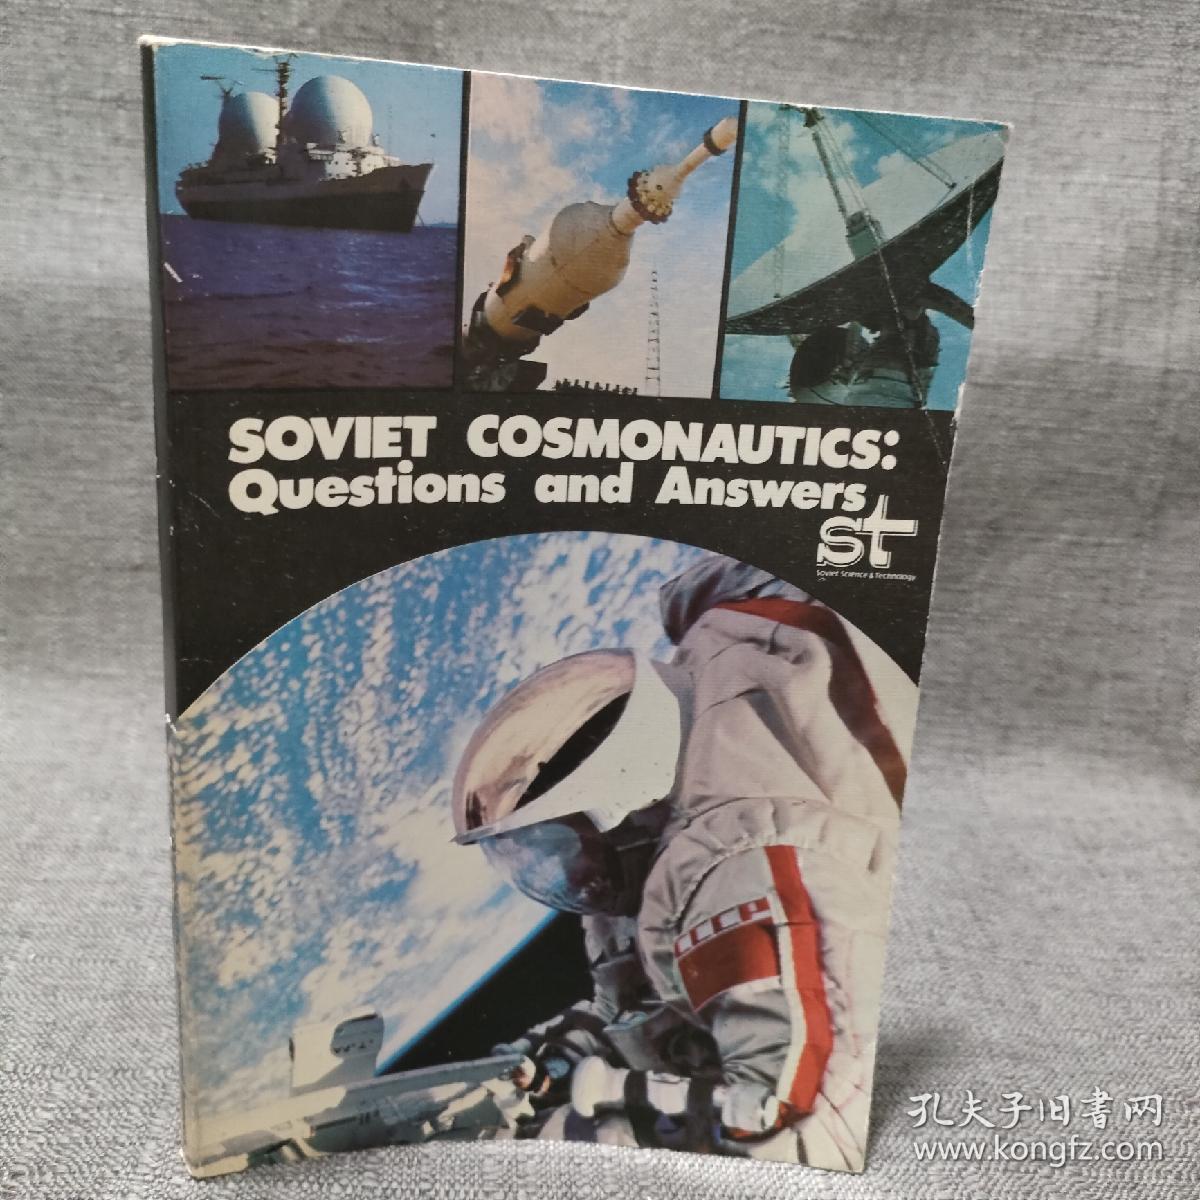 SOVIET COSMONAUTICS: Questions and Answers